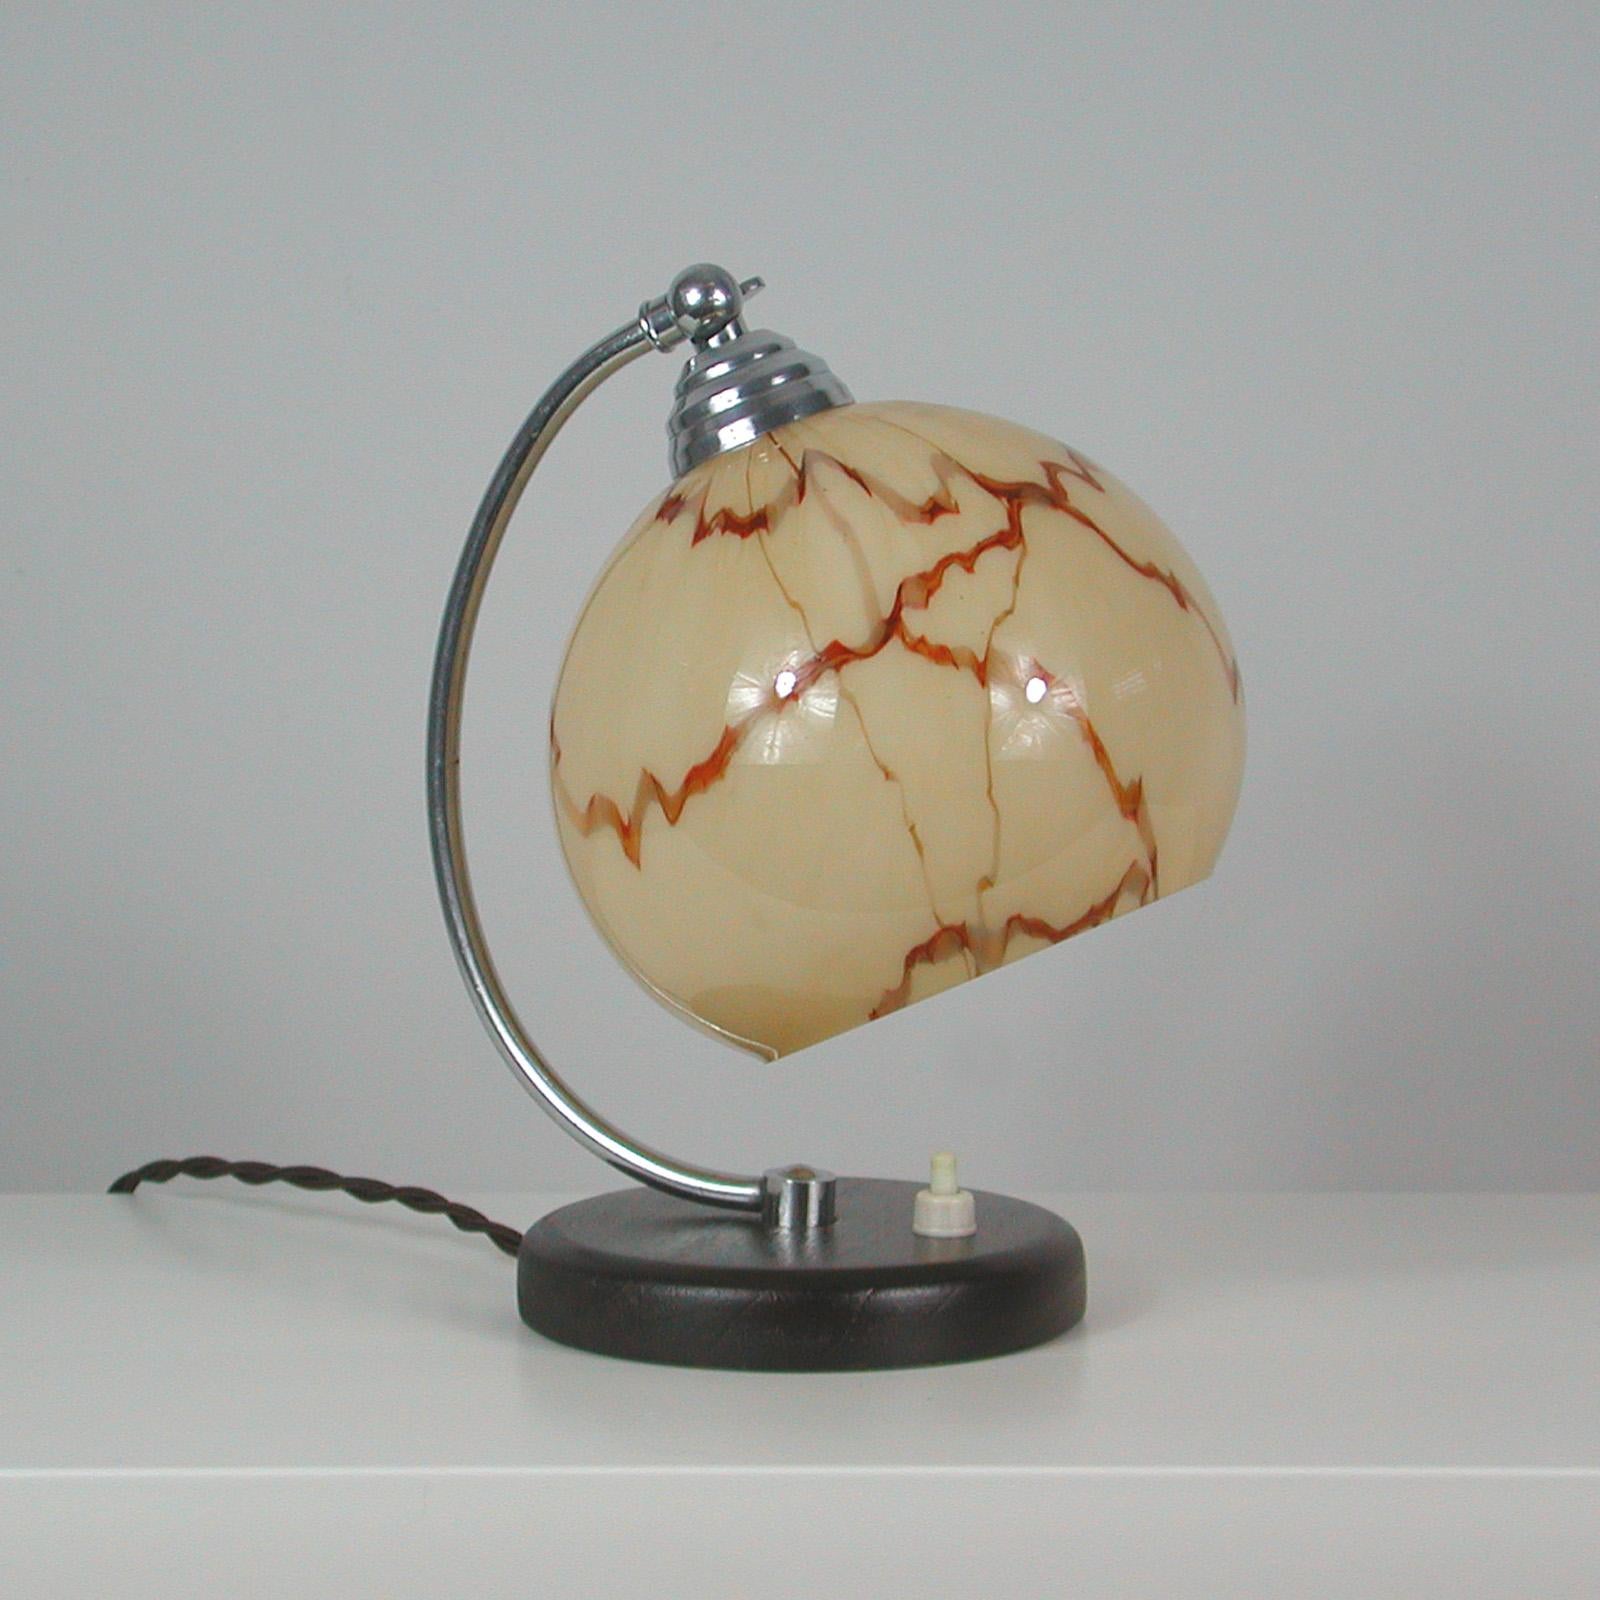 This cute bedside lamp was designed and manufactured in France during the Art Deco Bauhaus inspired period. It features a walnut base, chrome plated hardware and an adjustable cream colored opaline glass lampshade with marbled decoration. 

The